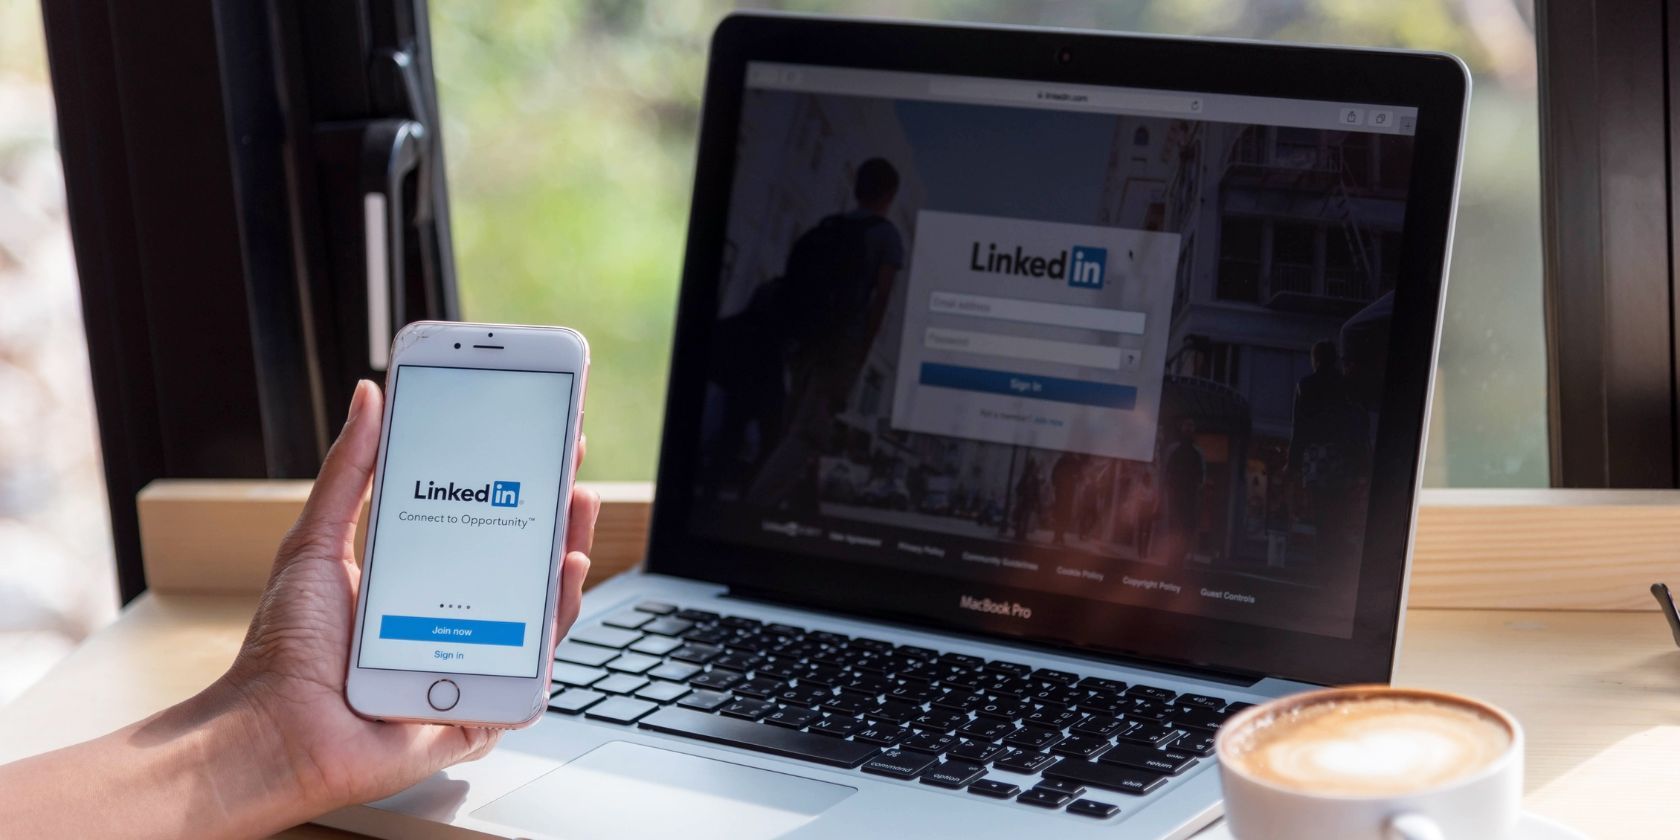 LinkedIn Has Added Games, but Here's Why You Shouldn't Play Them